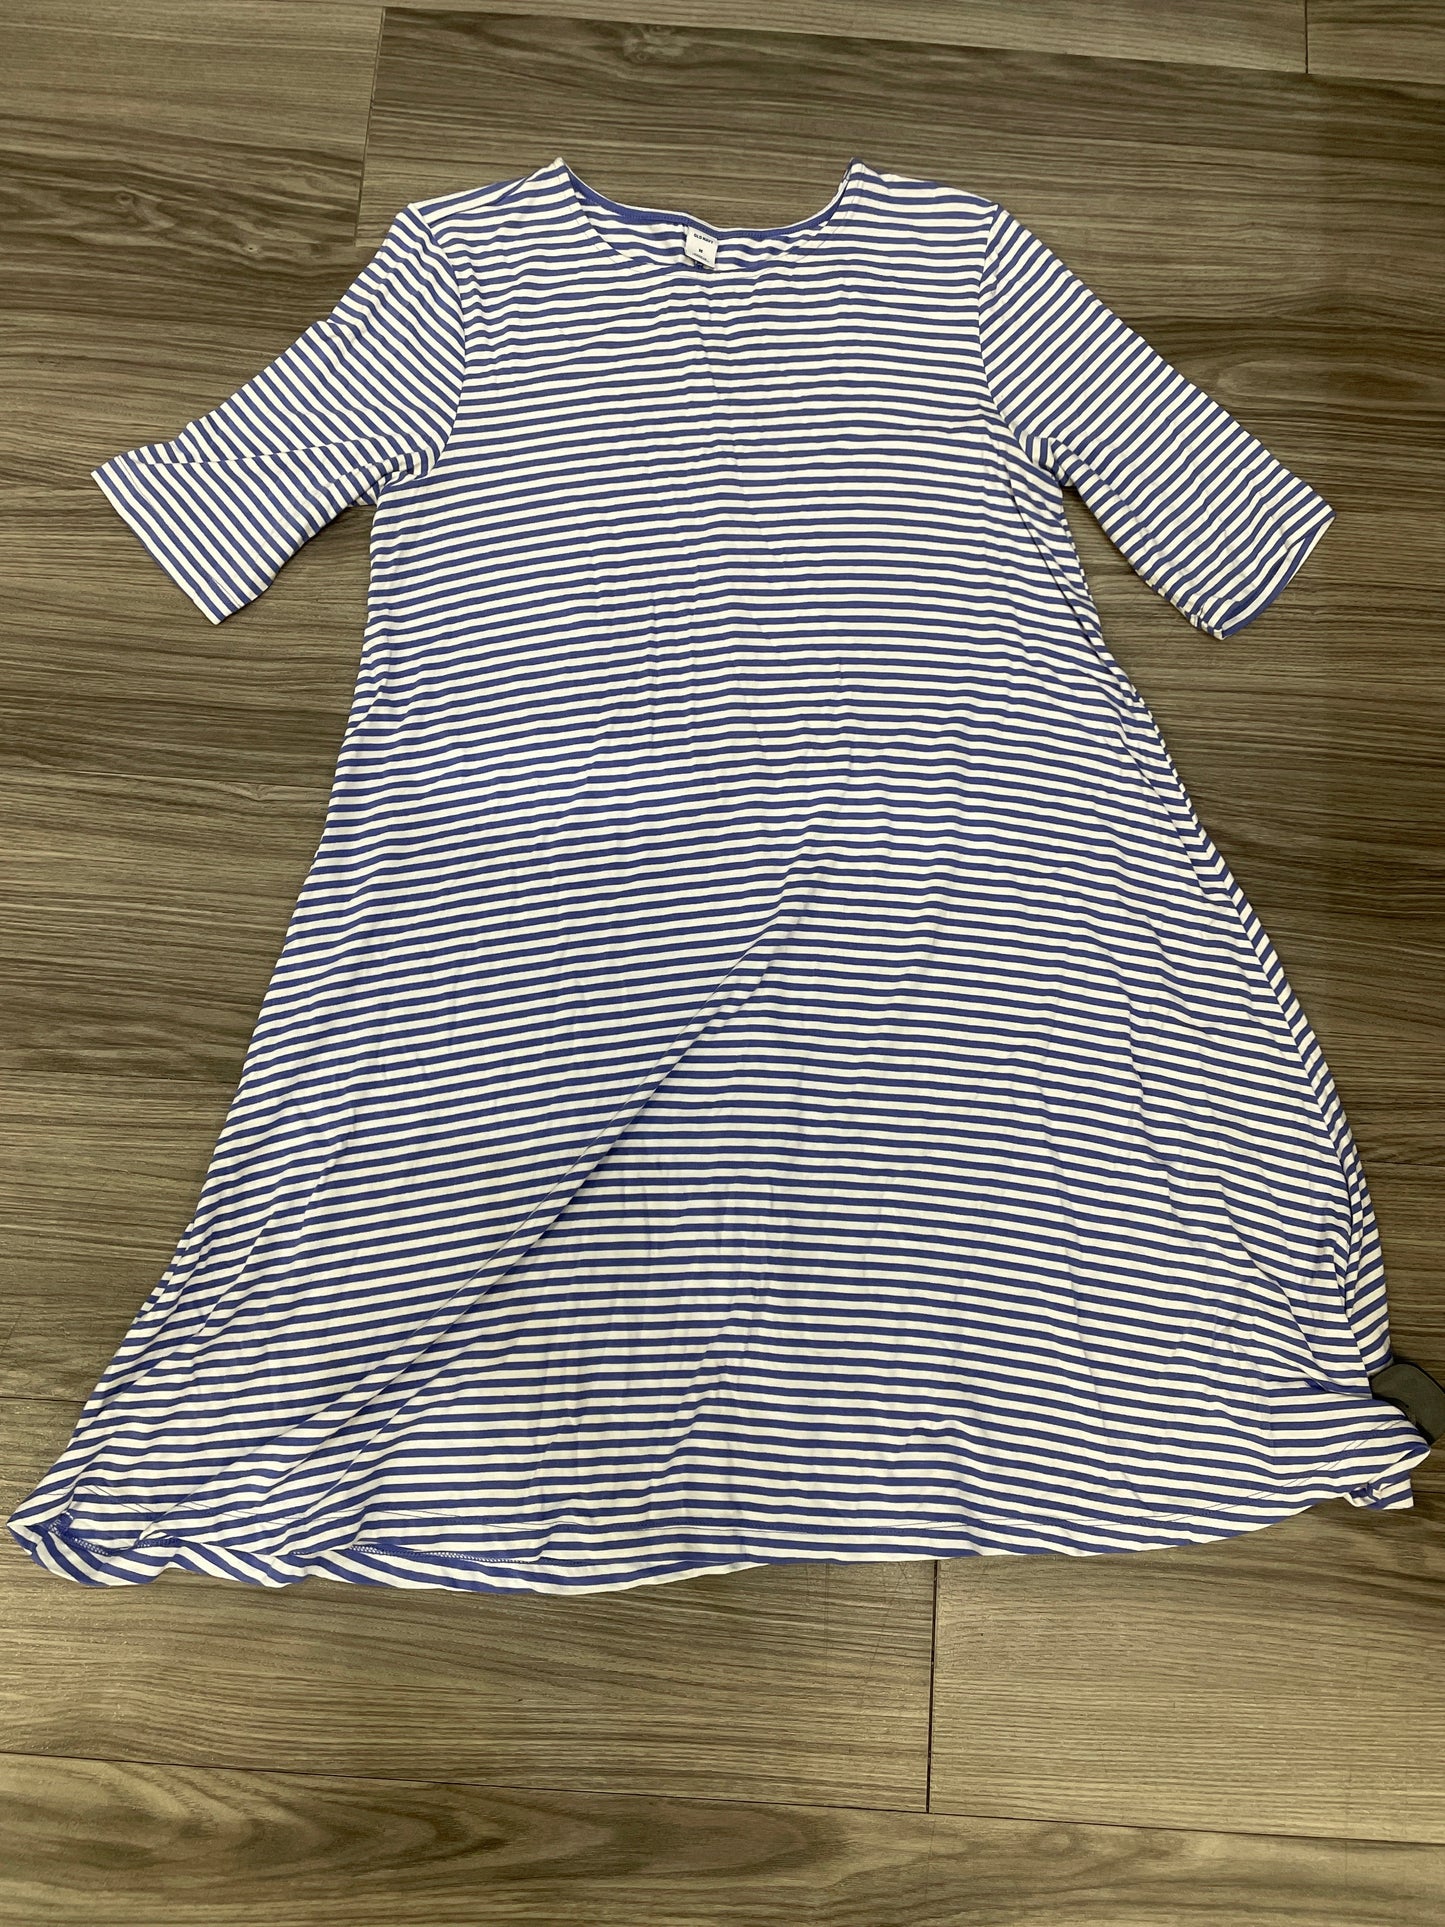 Striped Pattern Dress Casual Short Old Navy, Size M